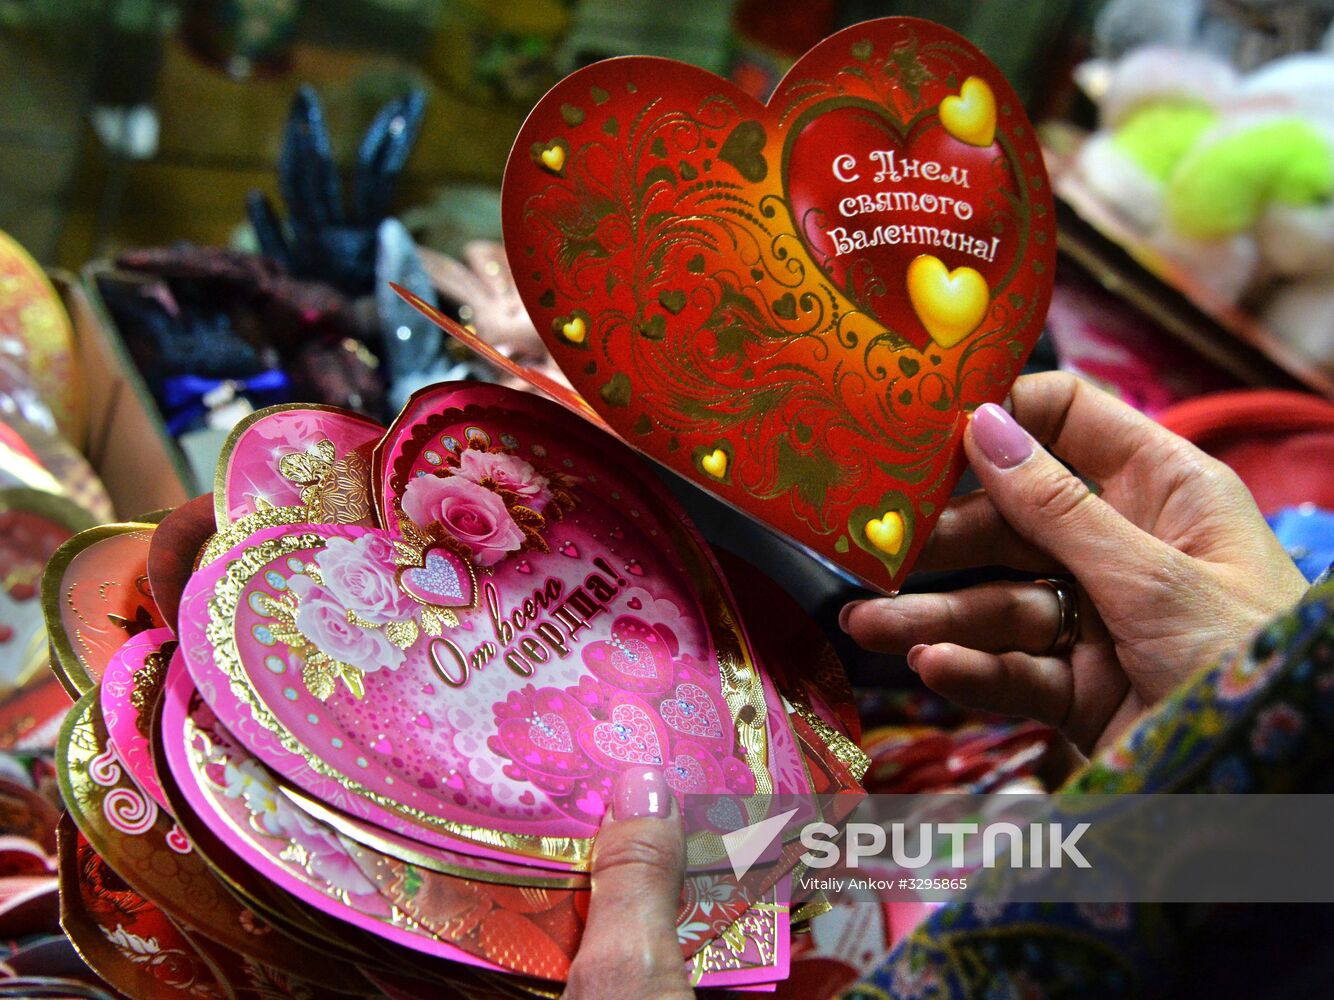 Preparations for St. Valentine's Day